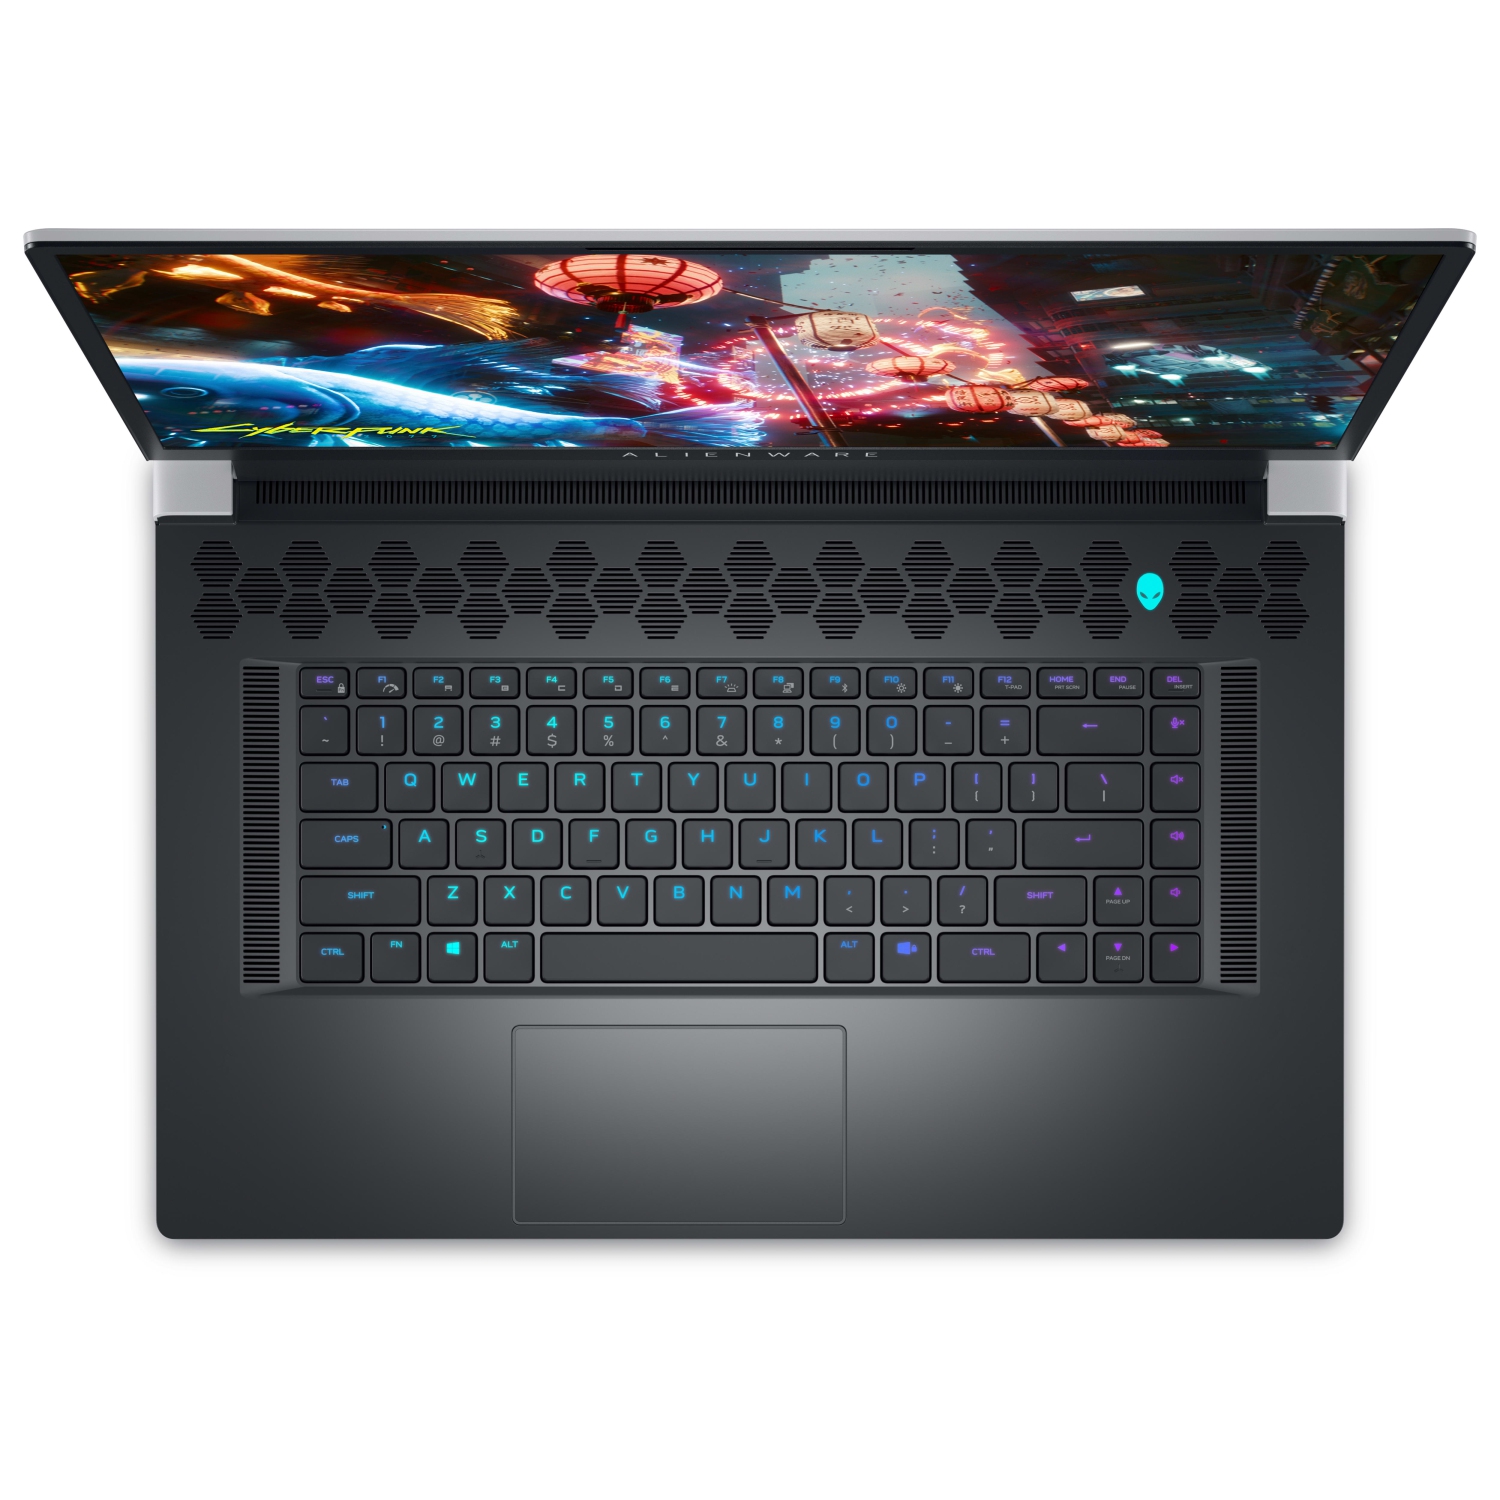 Refurbished (Excellent) – Dell Alienware X17 R2 Gaming Laptop (2022) | 17.3" FHD | Core i7 - 2TB SSD - 32GB RAM - 3080 Ti | 14 Cores @ 4.7 GHz - 12th Gen CPU - 12GB GDDR6X